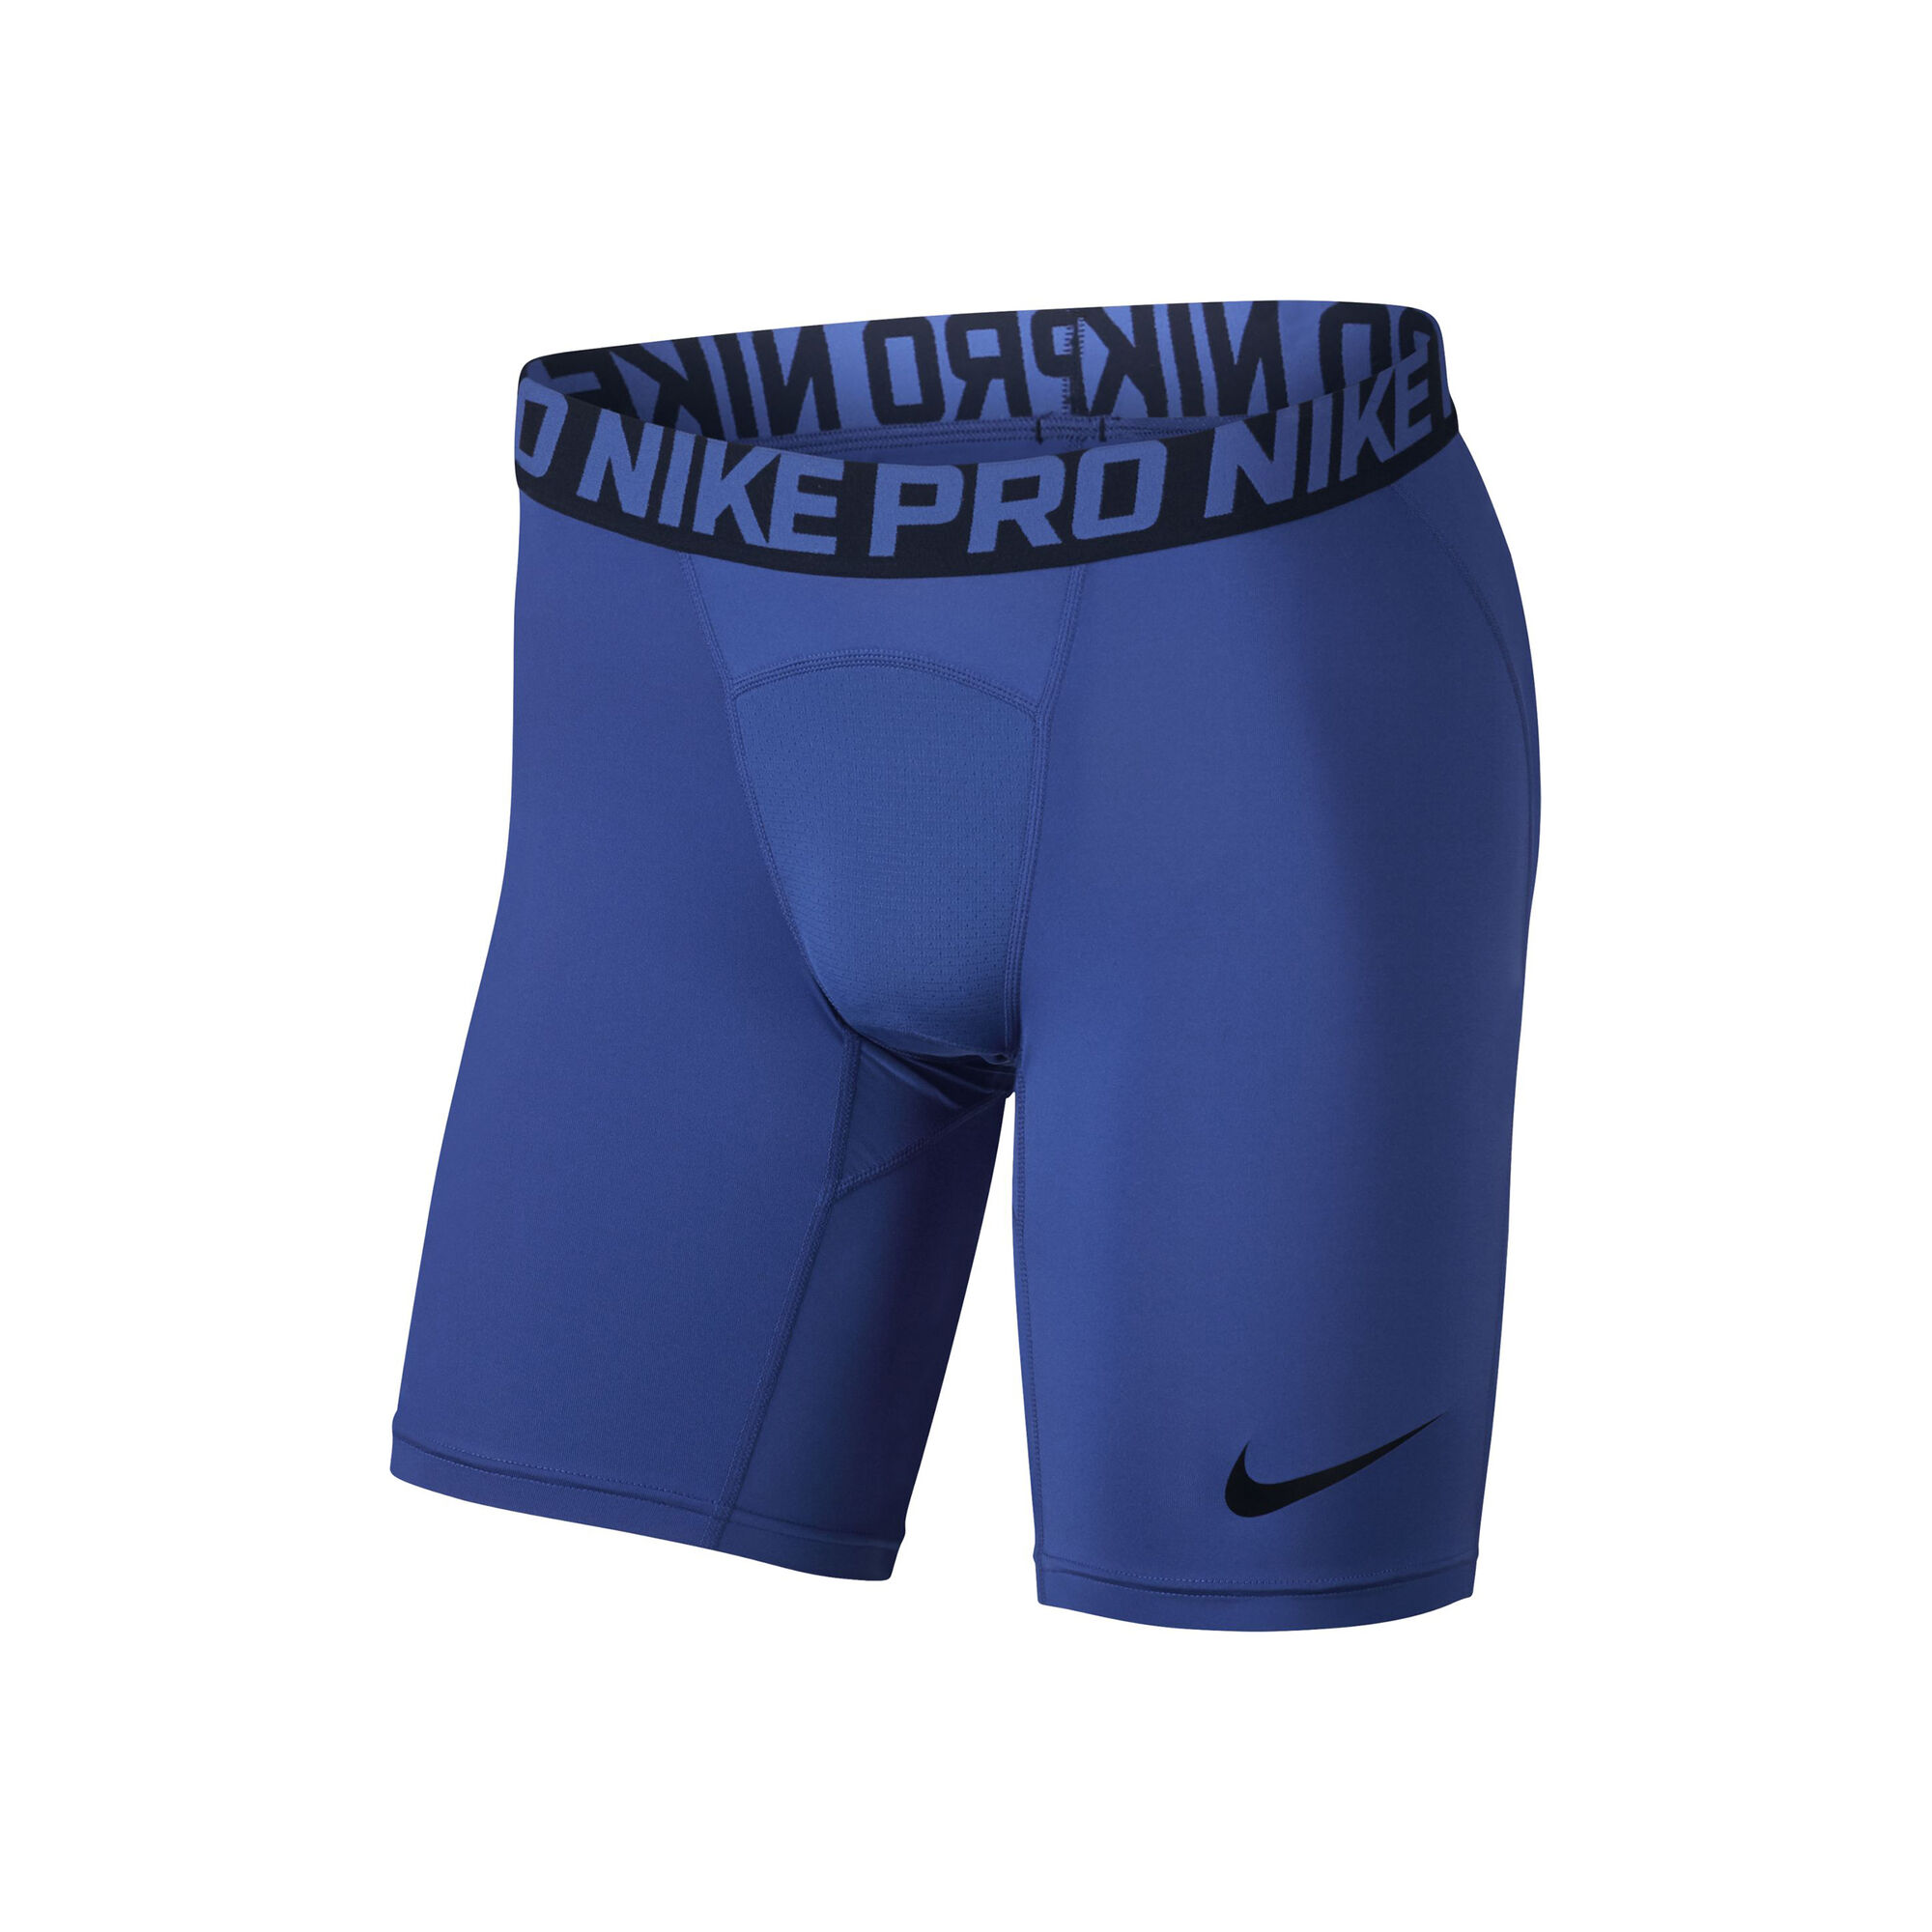 Nike Pro Tipo Hombres Azul, Negro online | Tennis-Point